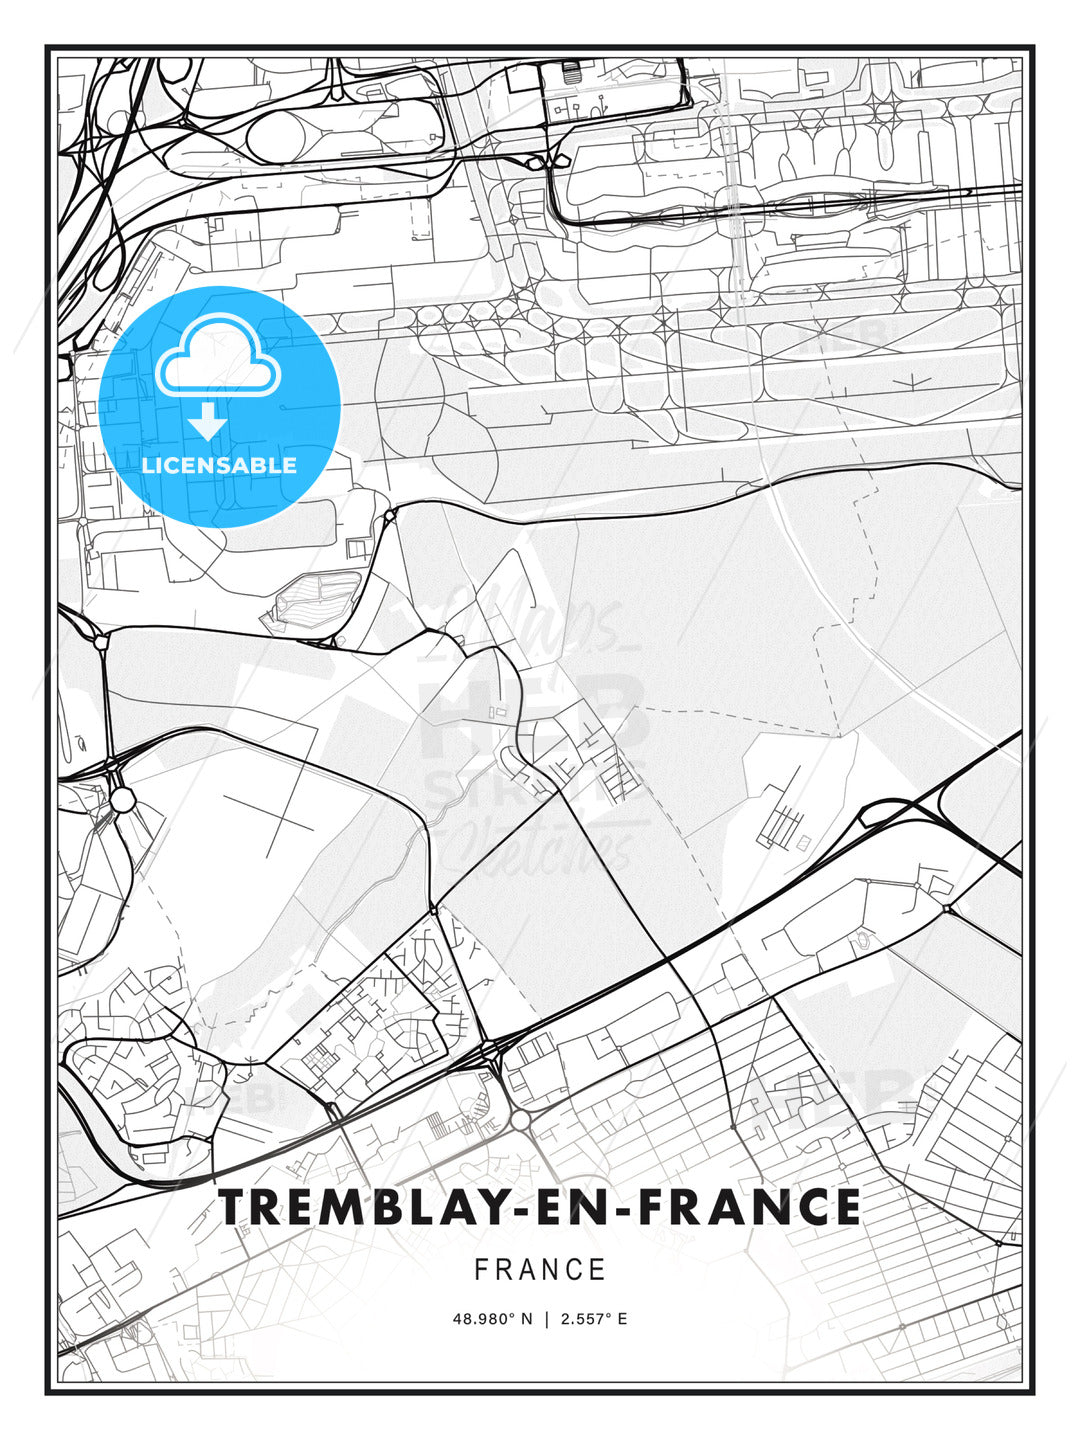 Tremblay-en-France, France, Modern Print Template in Various Formats - HEBSTREITS Sketches